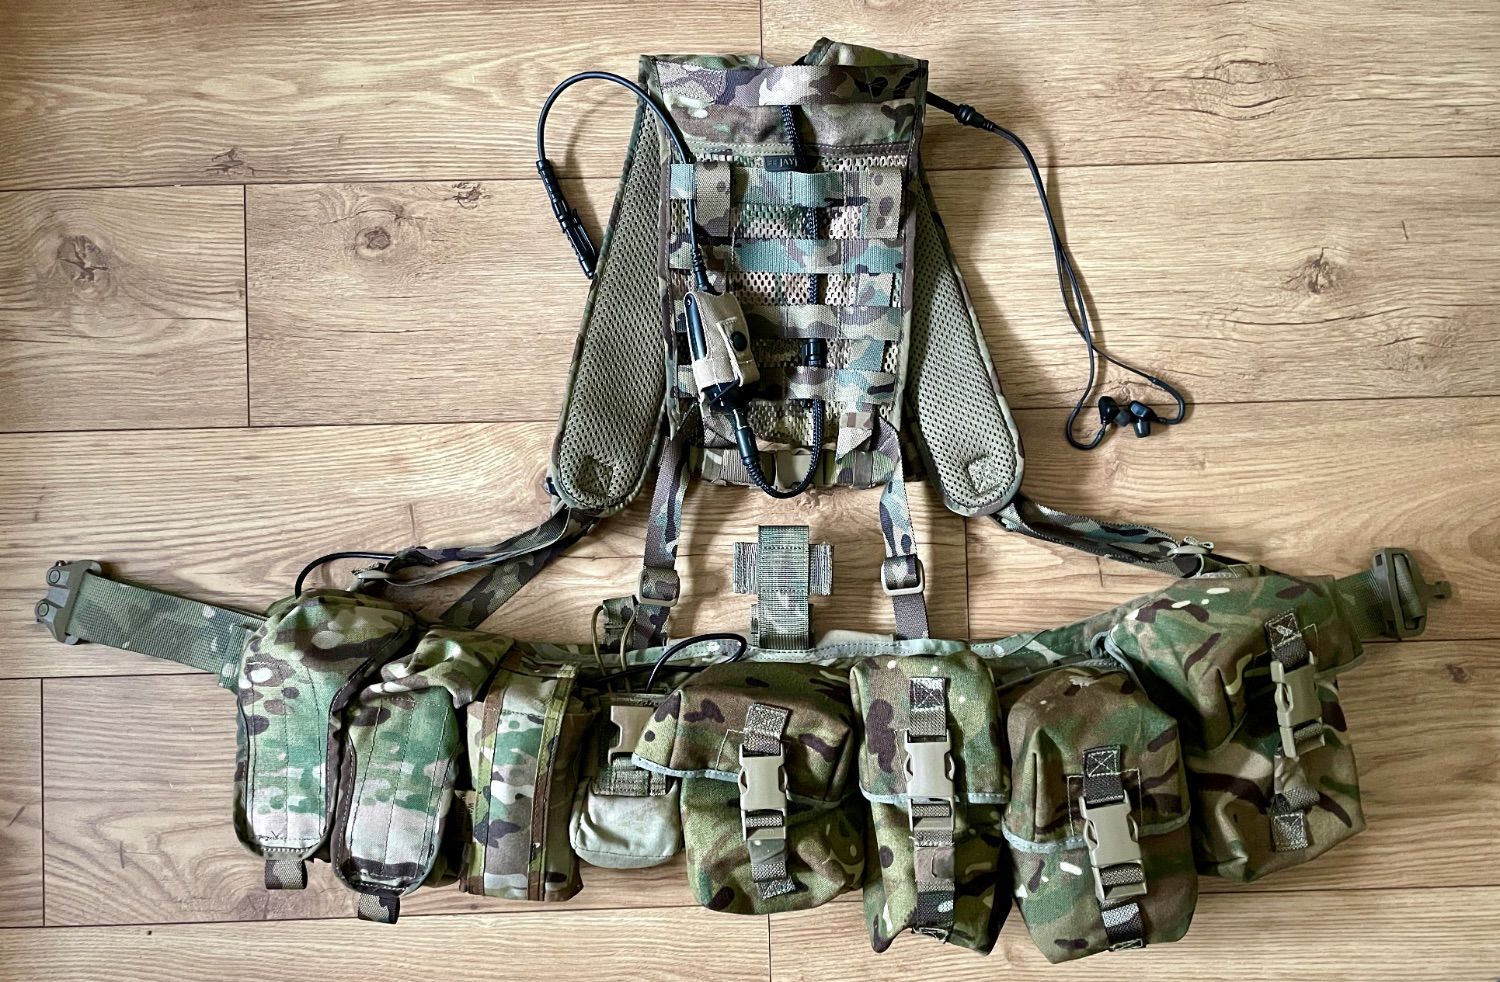 Crye avs chest rig set up - Gear - Airsoft Forums UK